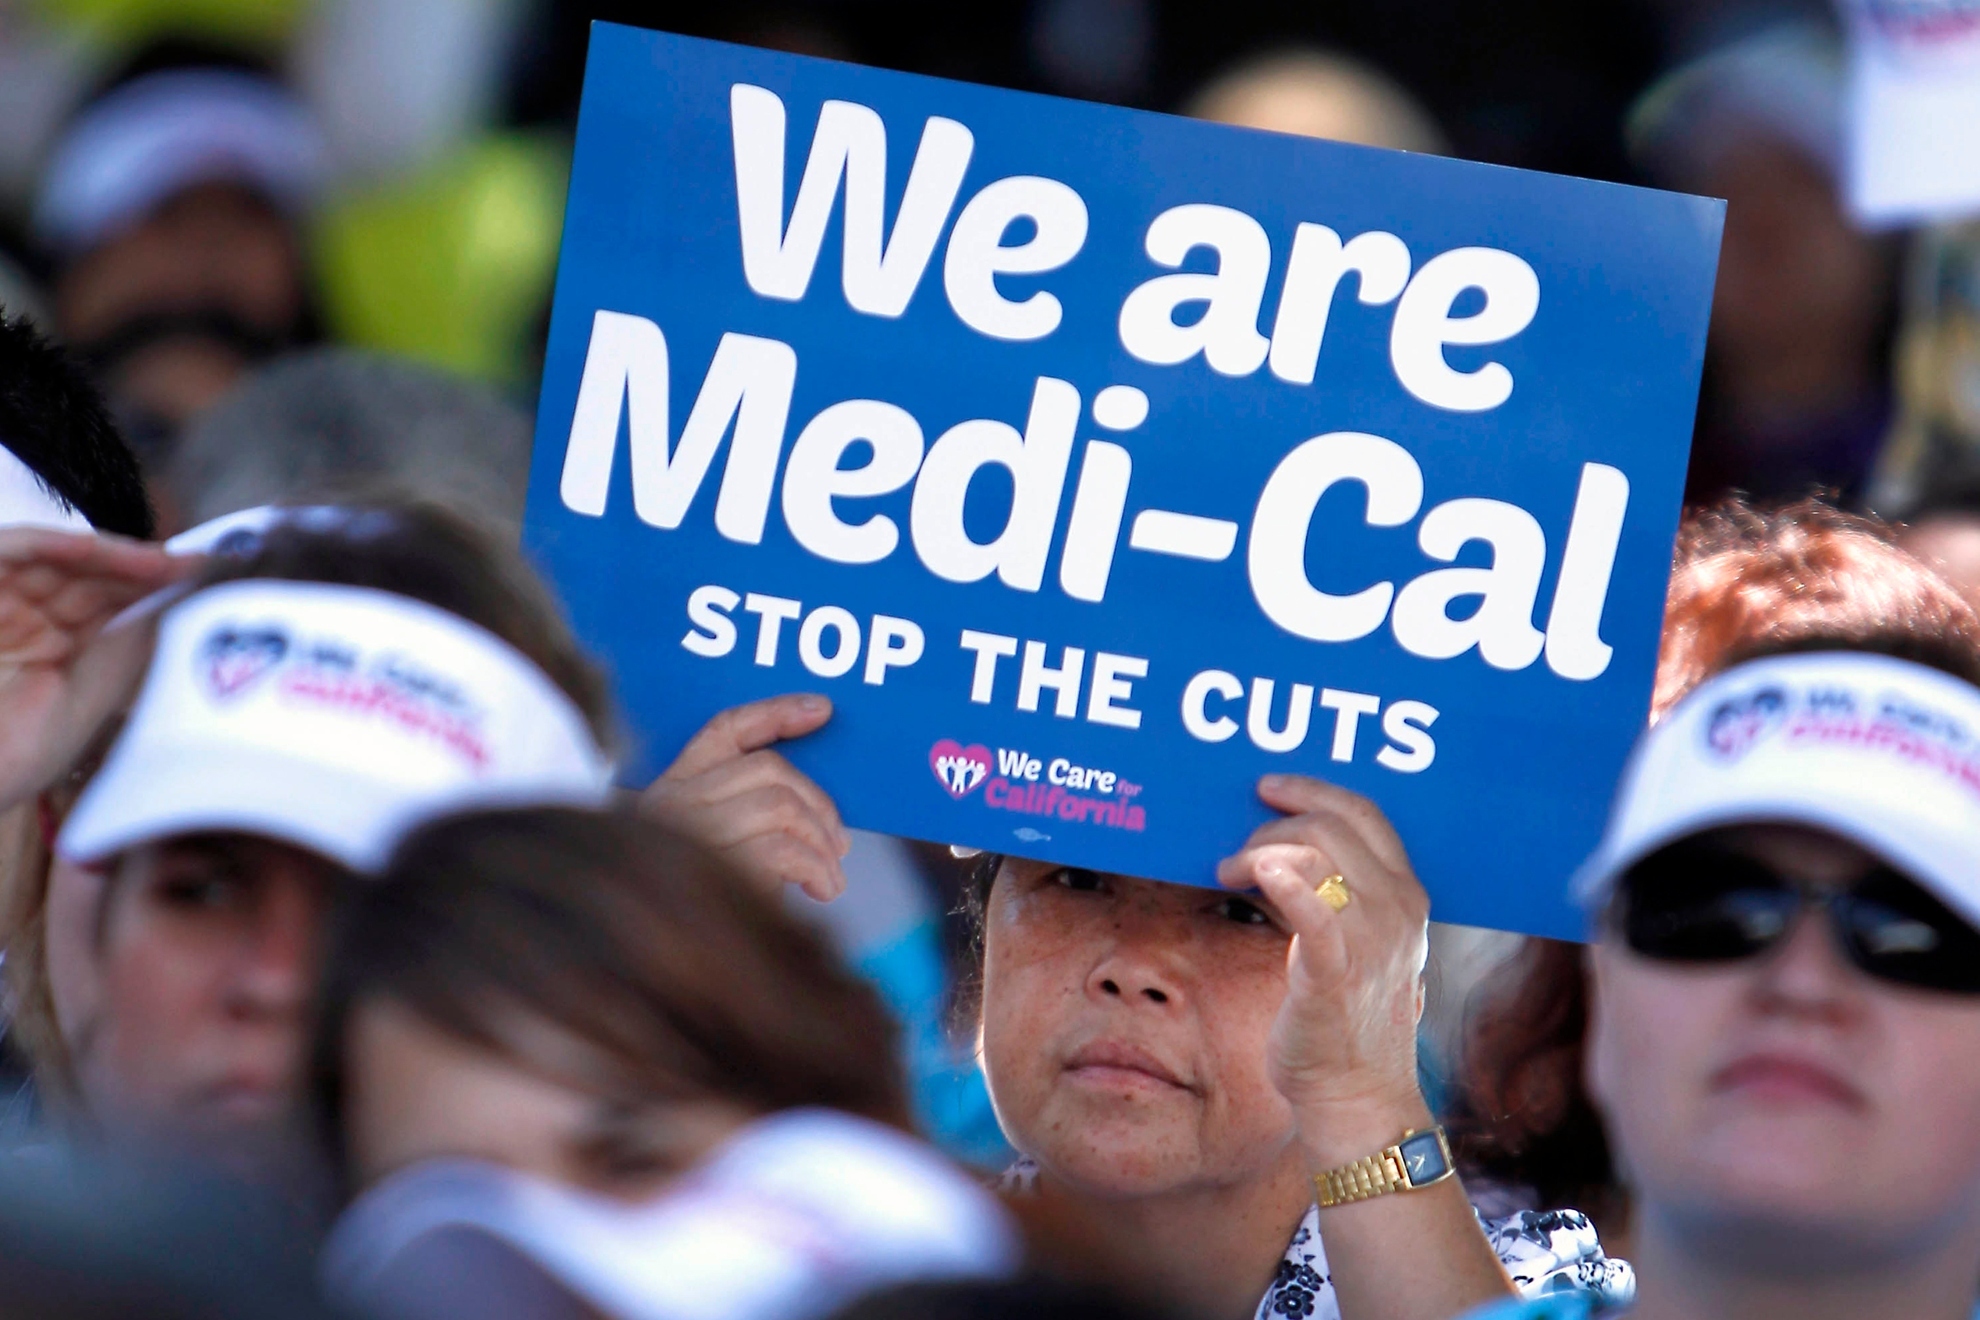 People affected by Medi-Cal cuts are protesting.